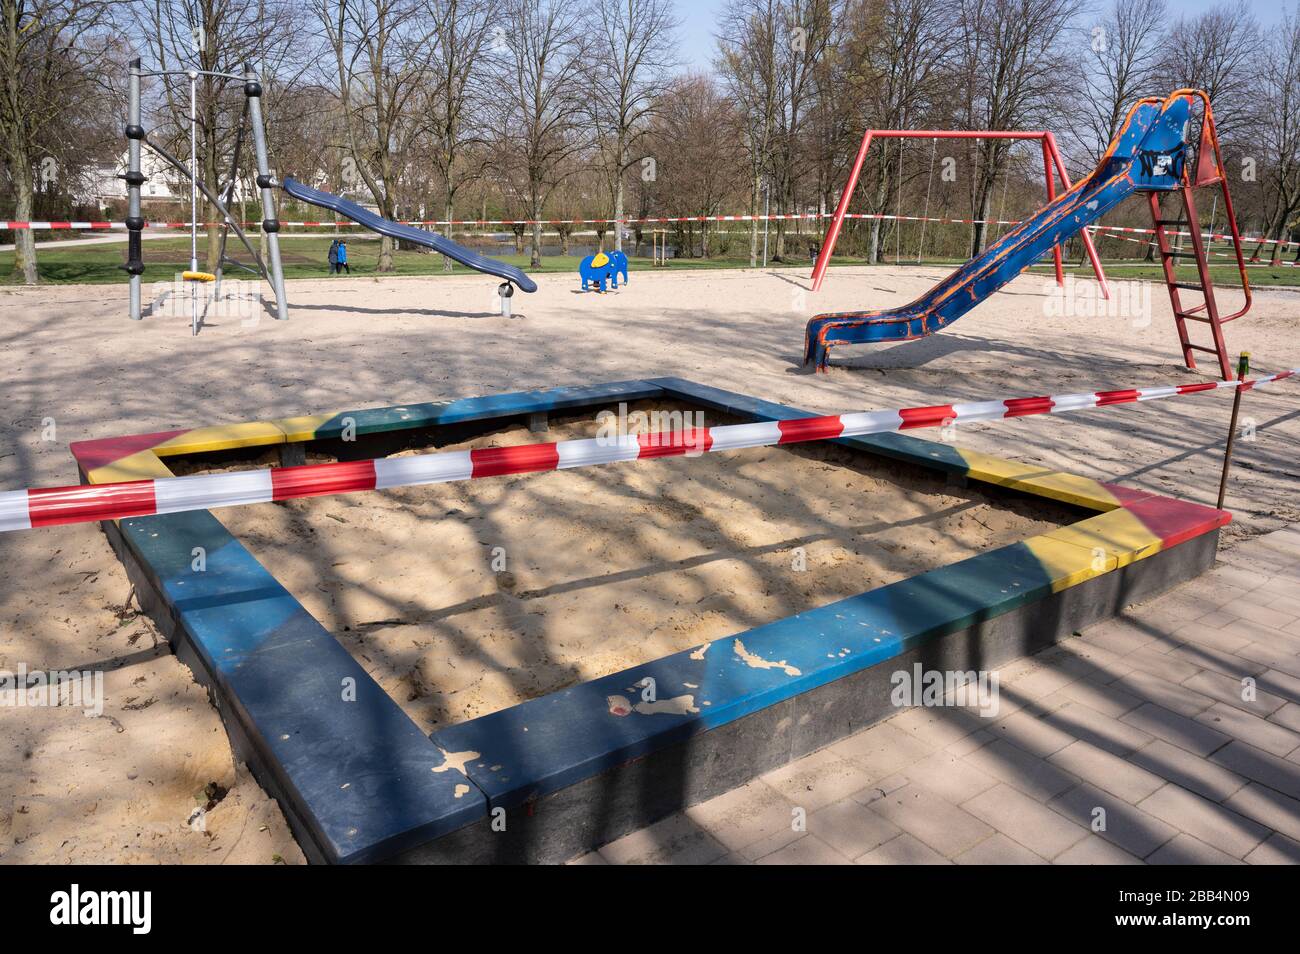 Safety measures: A children's playground is closed to avoid spreading of the virus / covid-19 disease during coronavirus pandemic Stock Photo